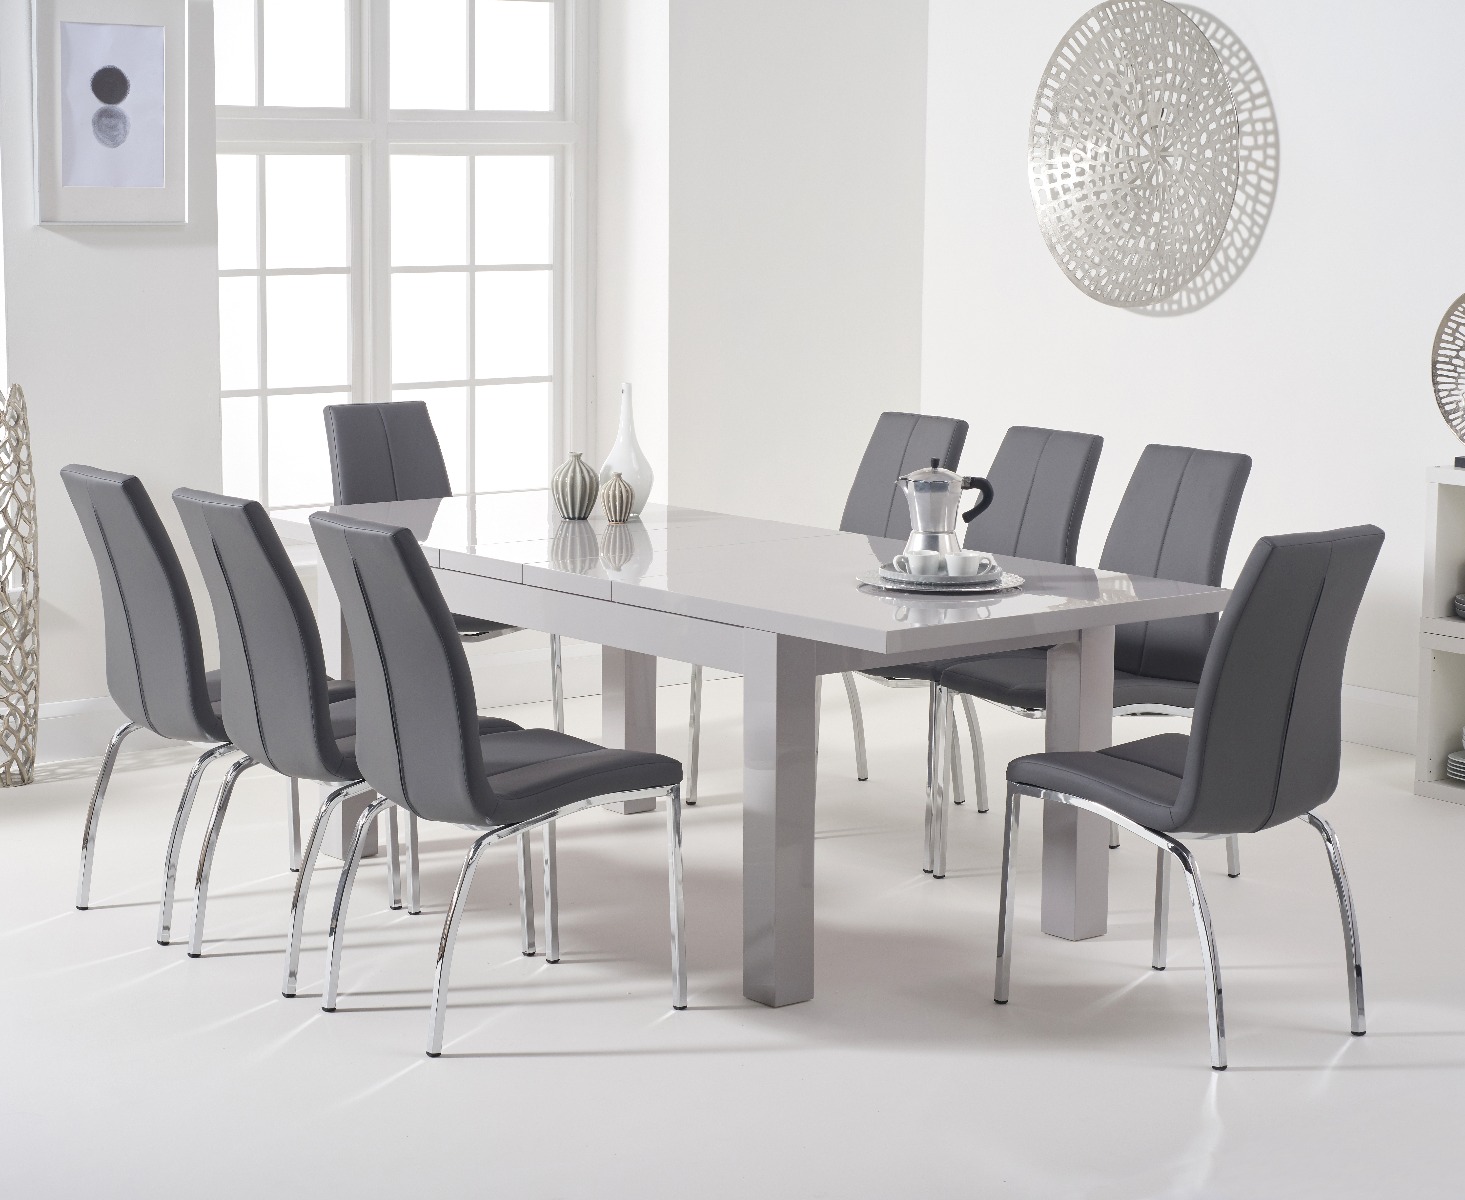 Atlanta Light Grey Gloss 160220cm Extending Dining Table With 6 Ivory White Cavello Chairs